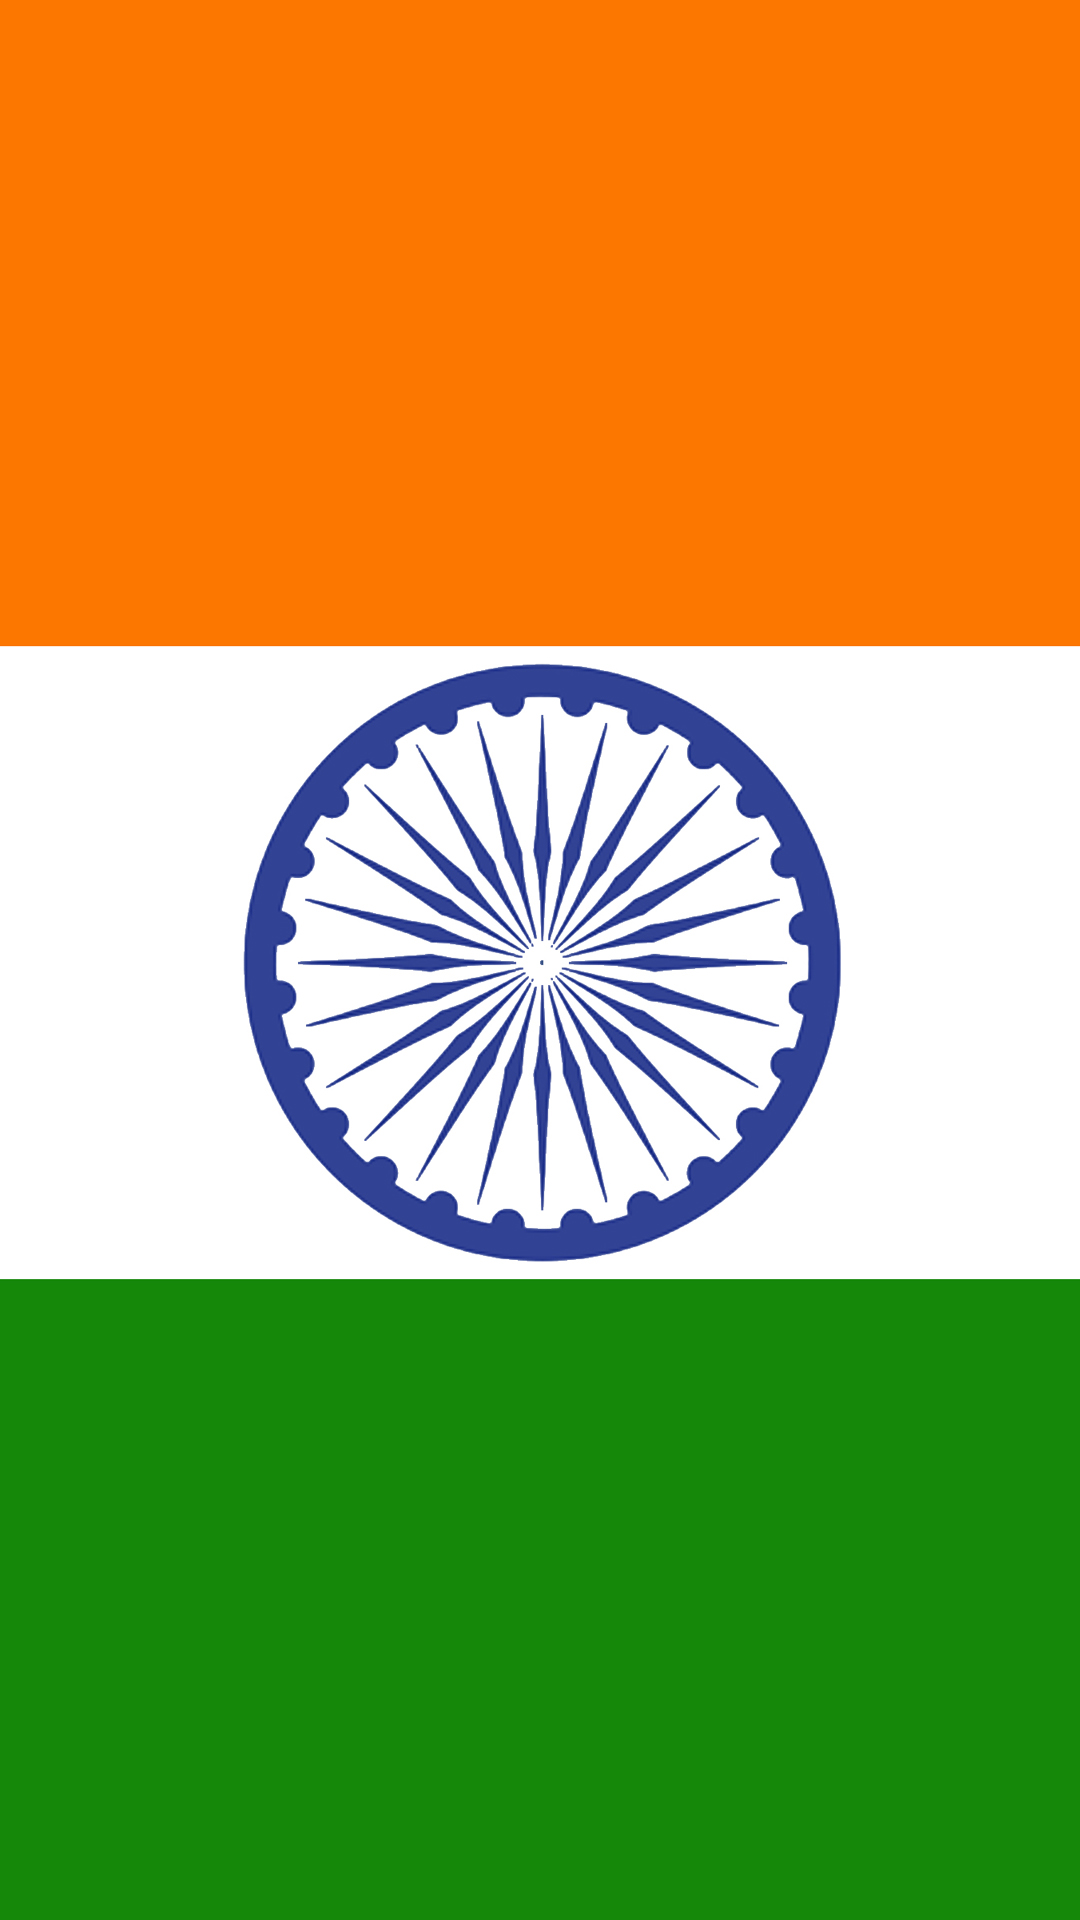 India Flag For Mobile Phone Wallpaper 01 Of 17 Pictures - Indian Flag Wallpaper For Mobile Hd , HD Wallpaper & Backgrounds